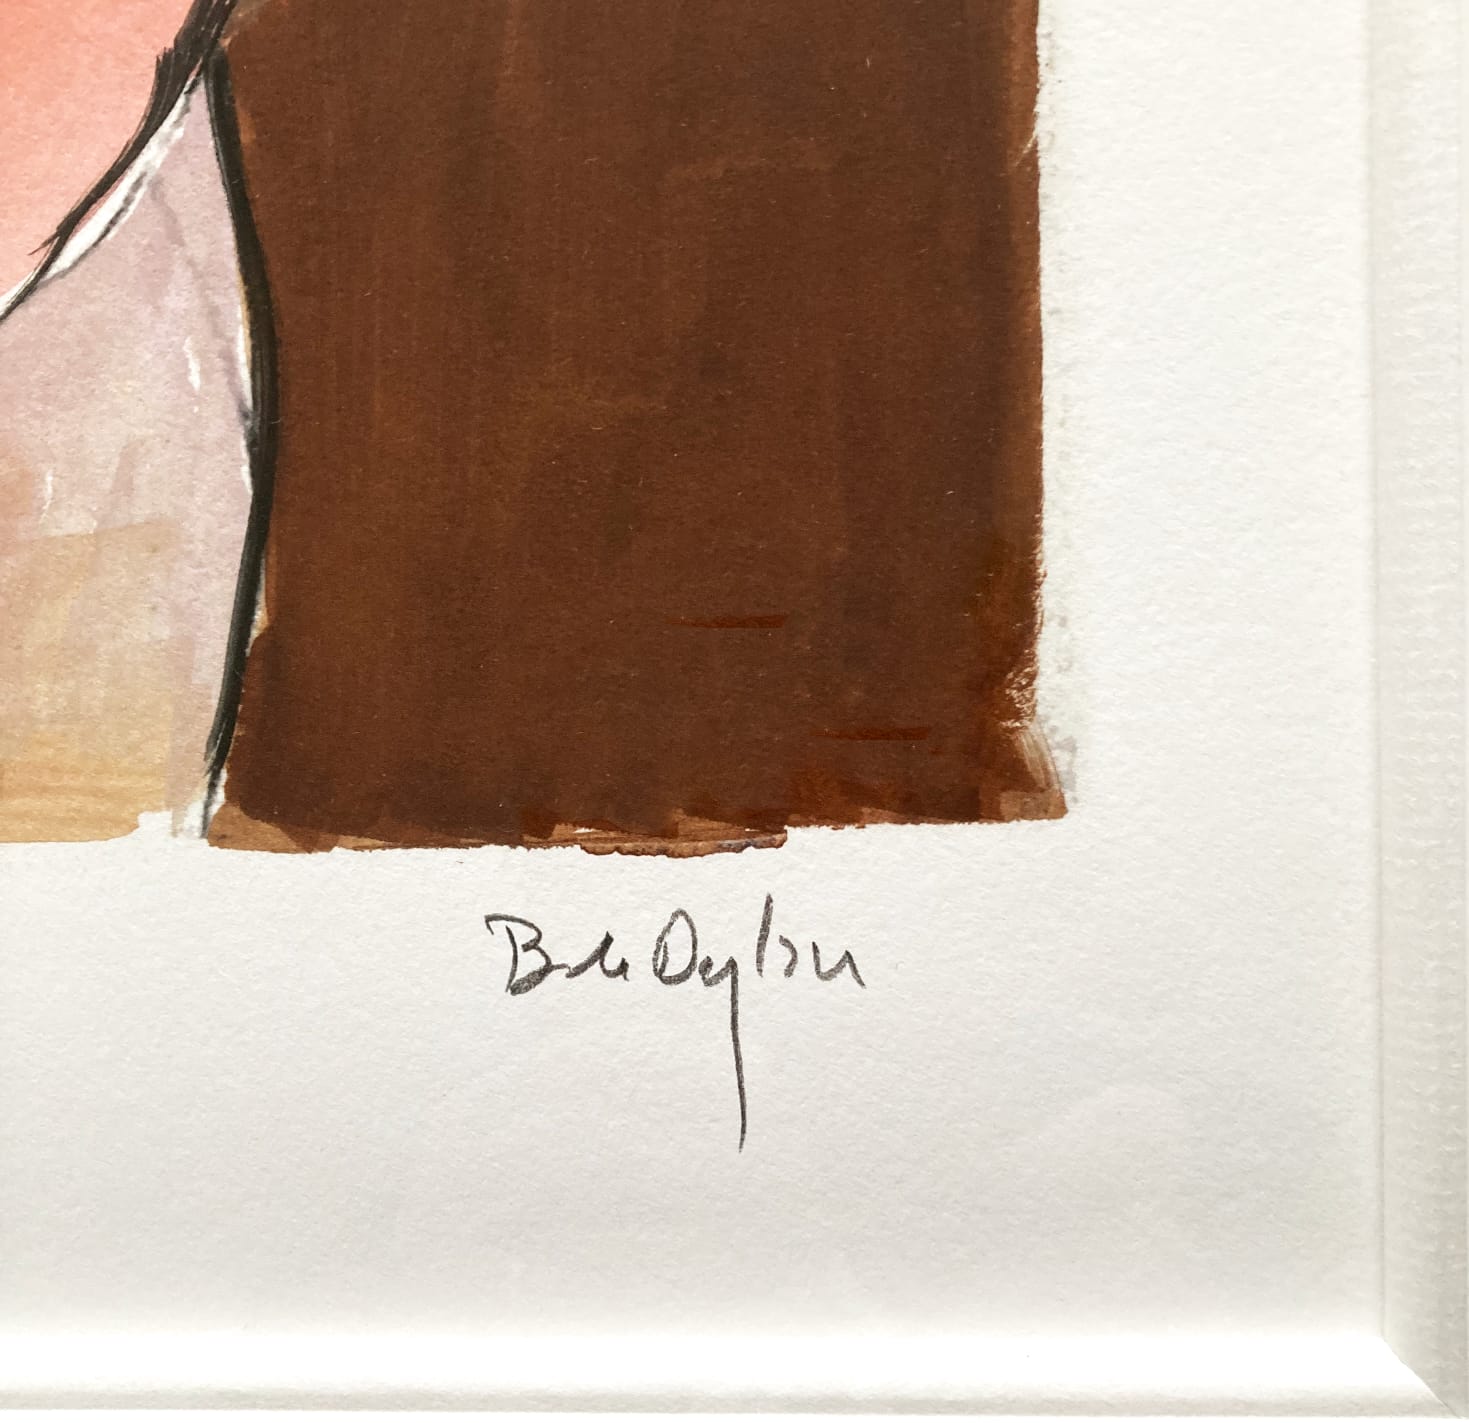 Bob Dylan - Woman in Red, 2008